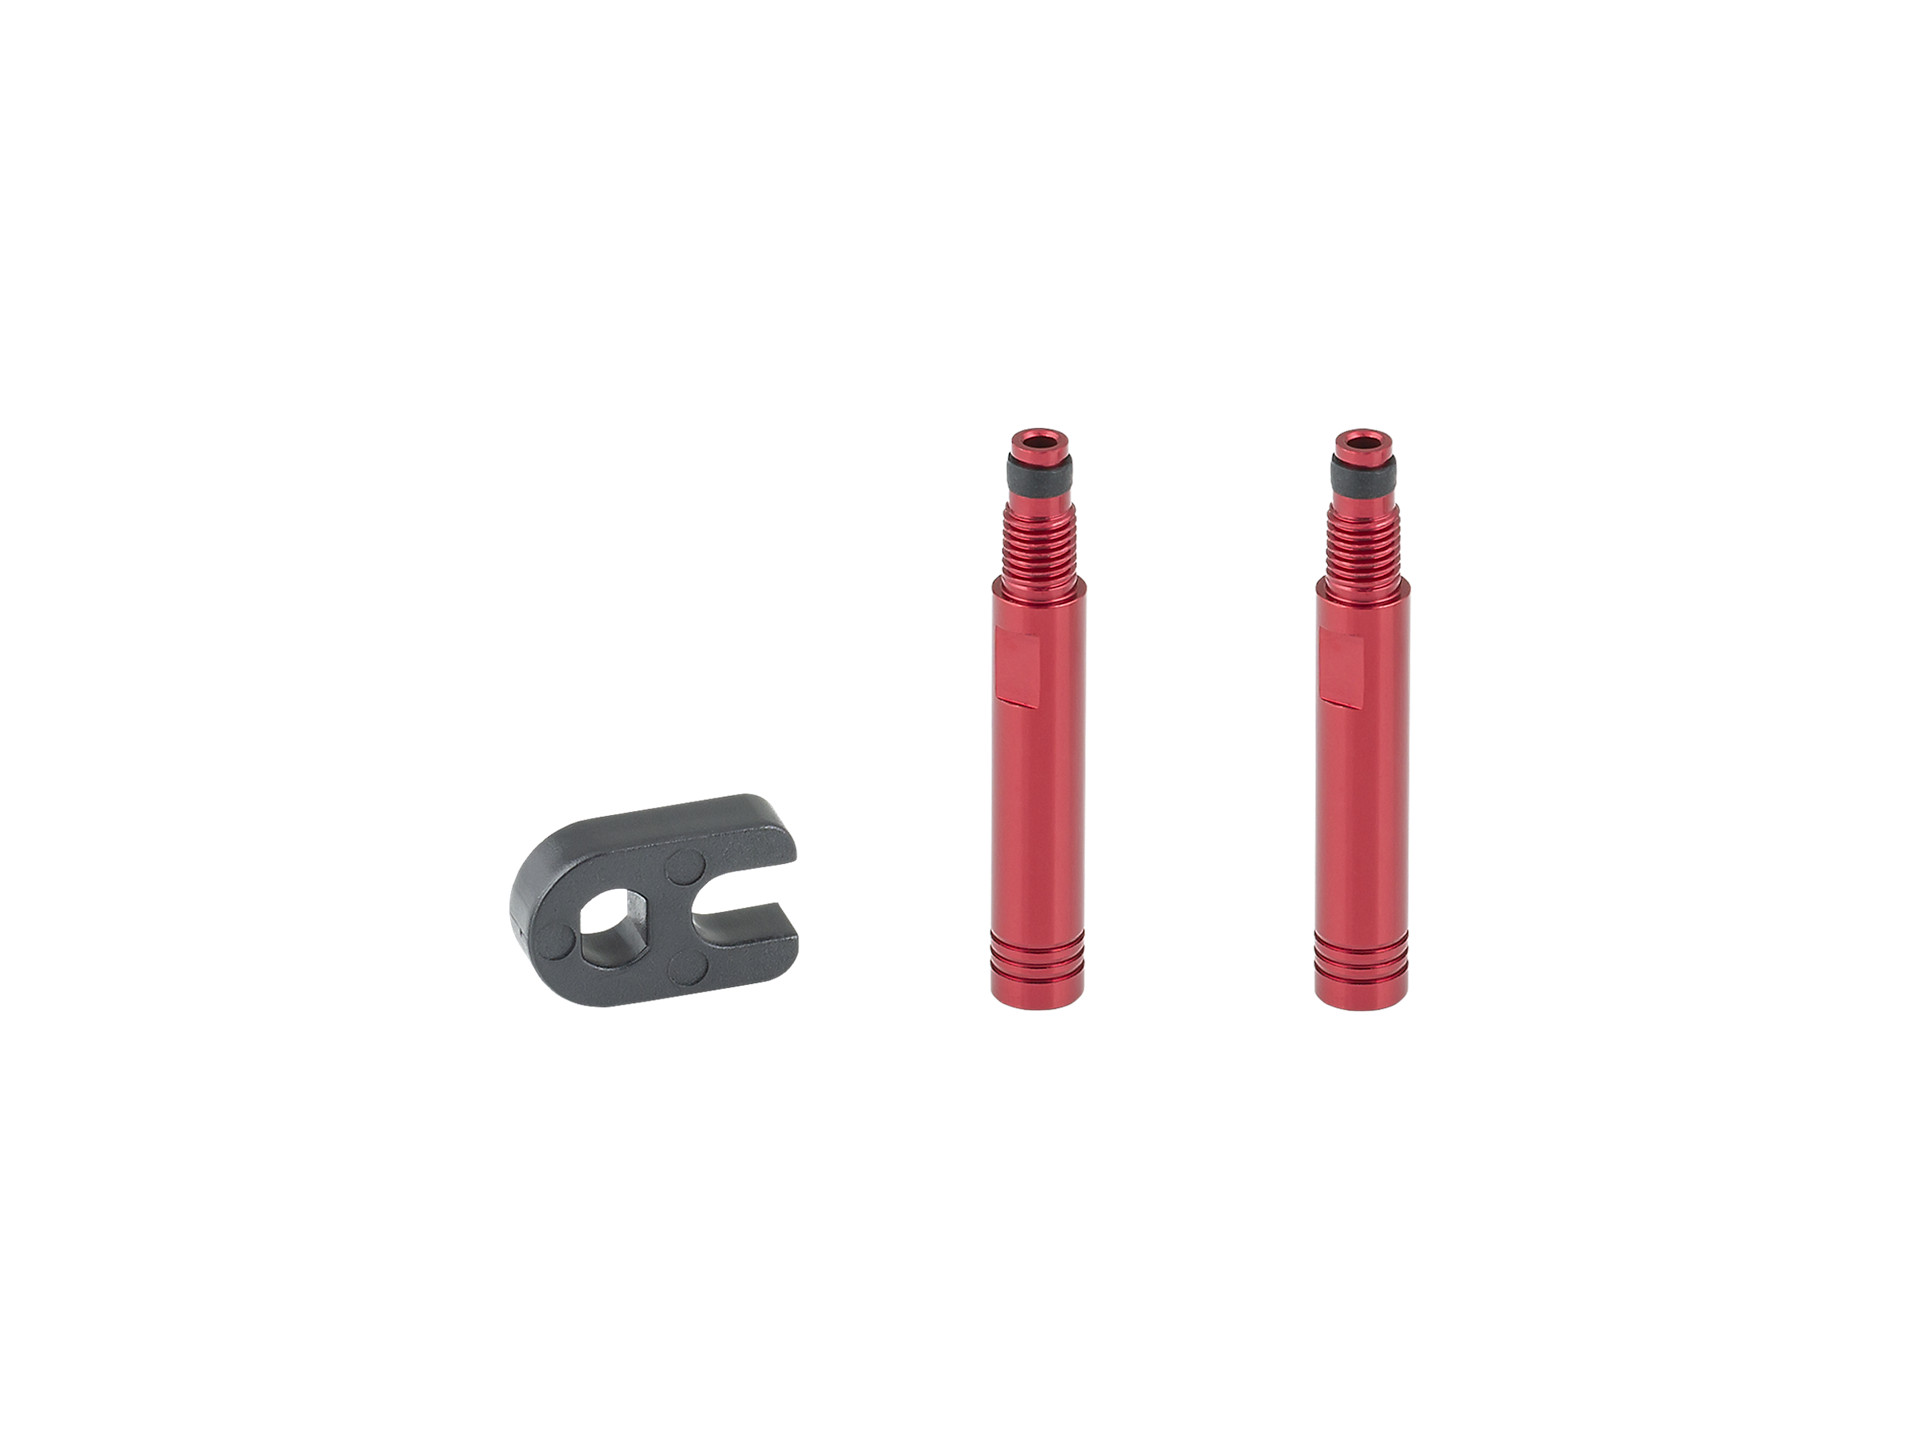 Details about   Zipp Valve Extender Hex Wrench Tool Bicycle Tube Valve 